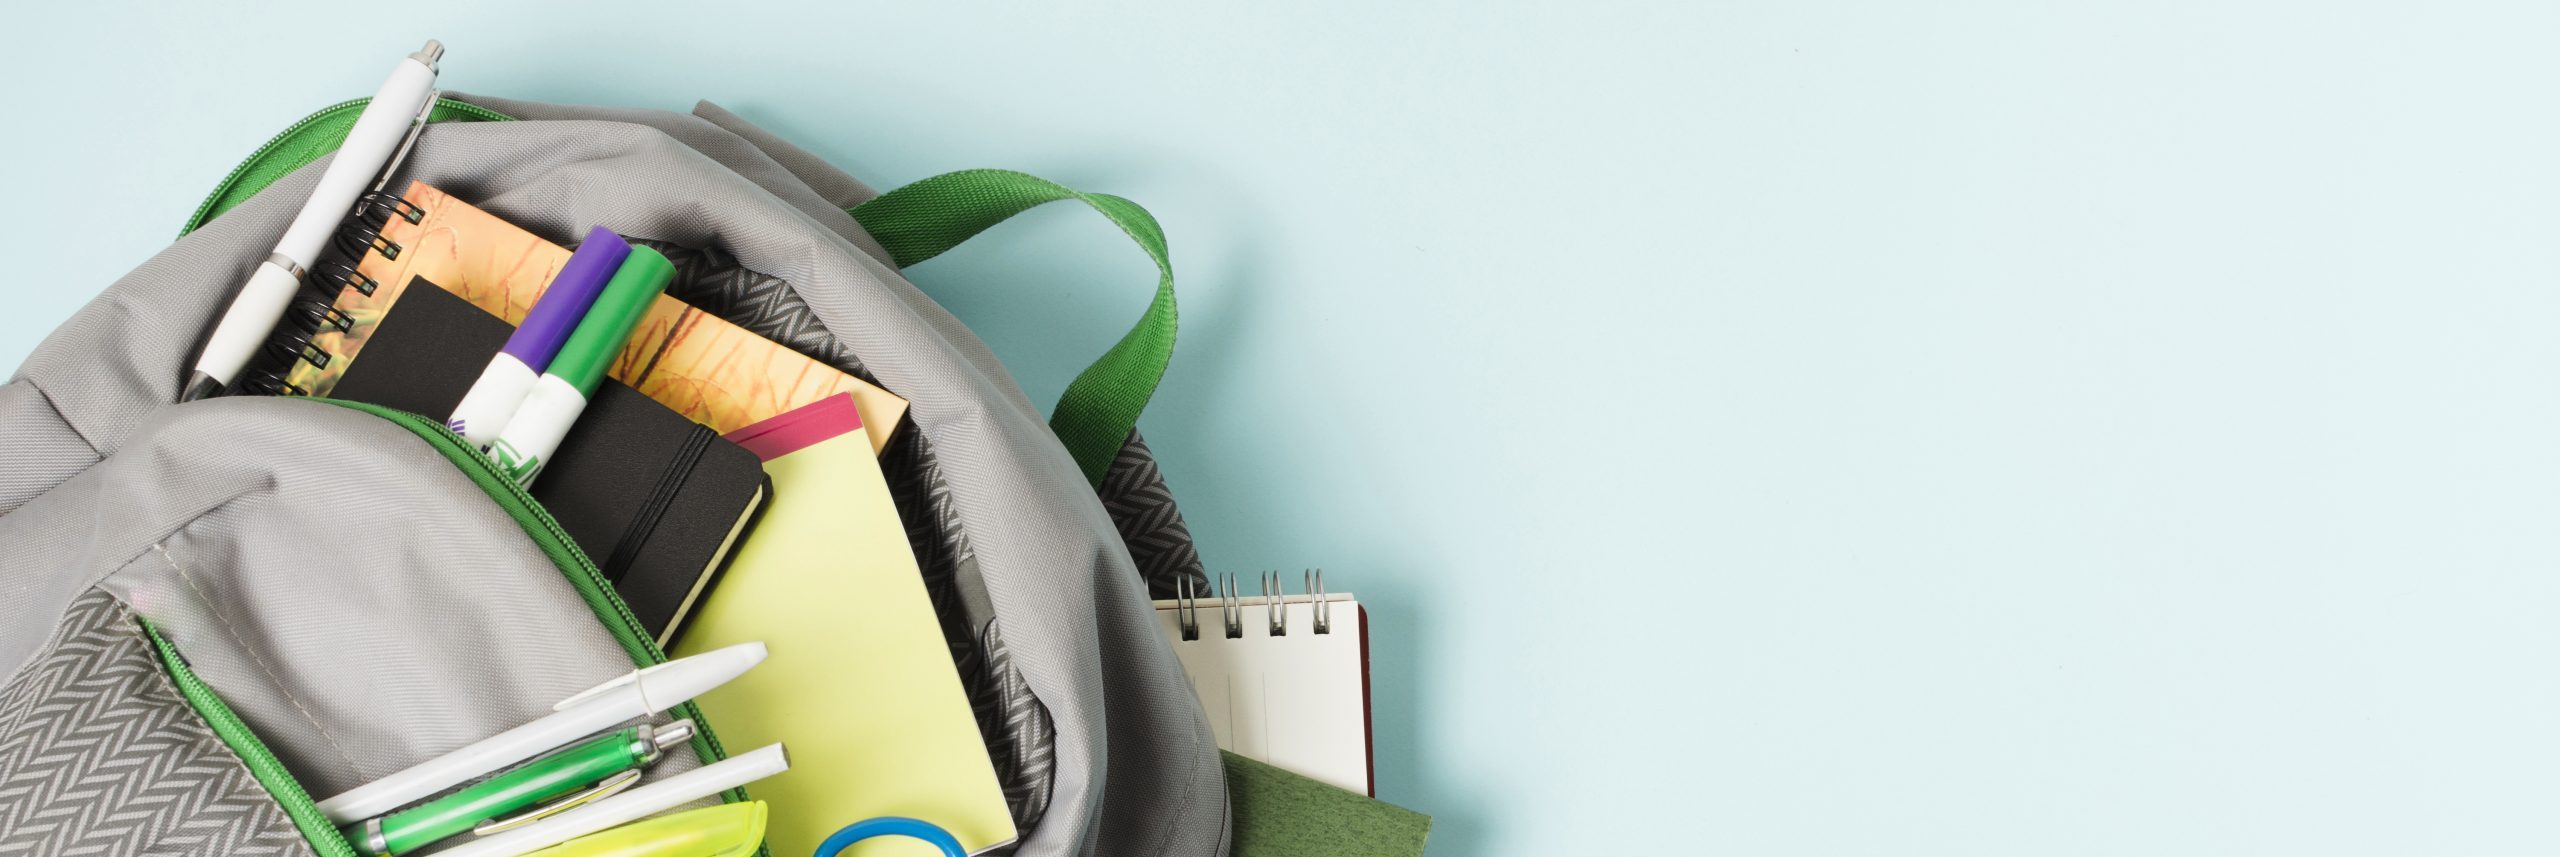 Before starting school: What should you have in your school bag?